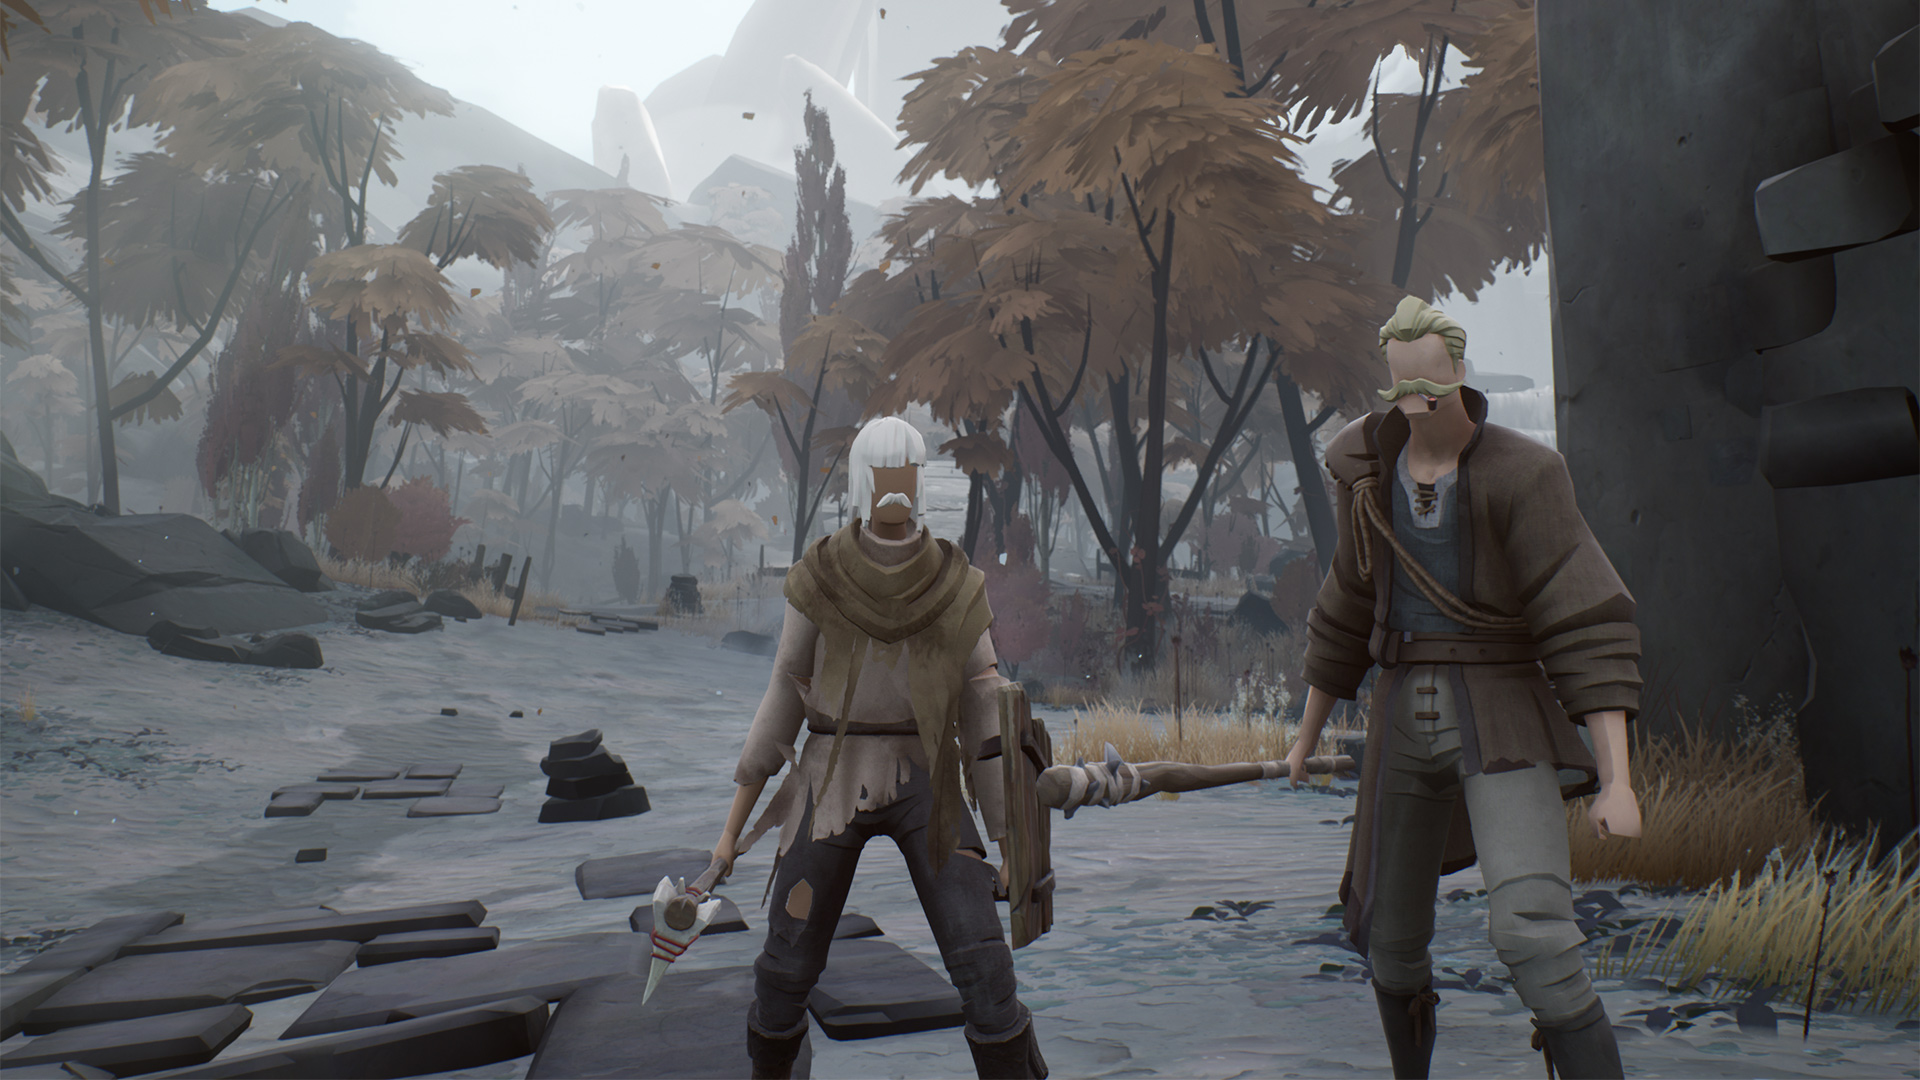 the ashen download free